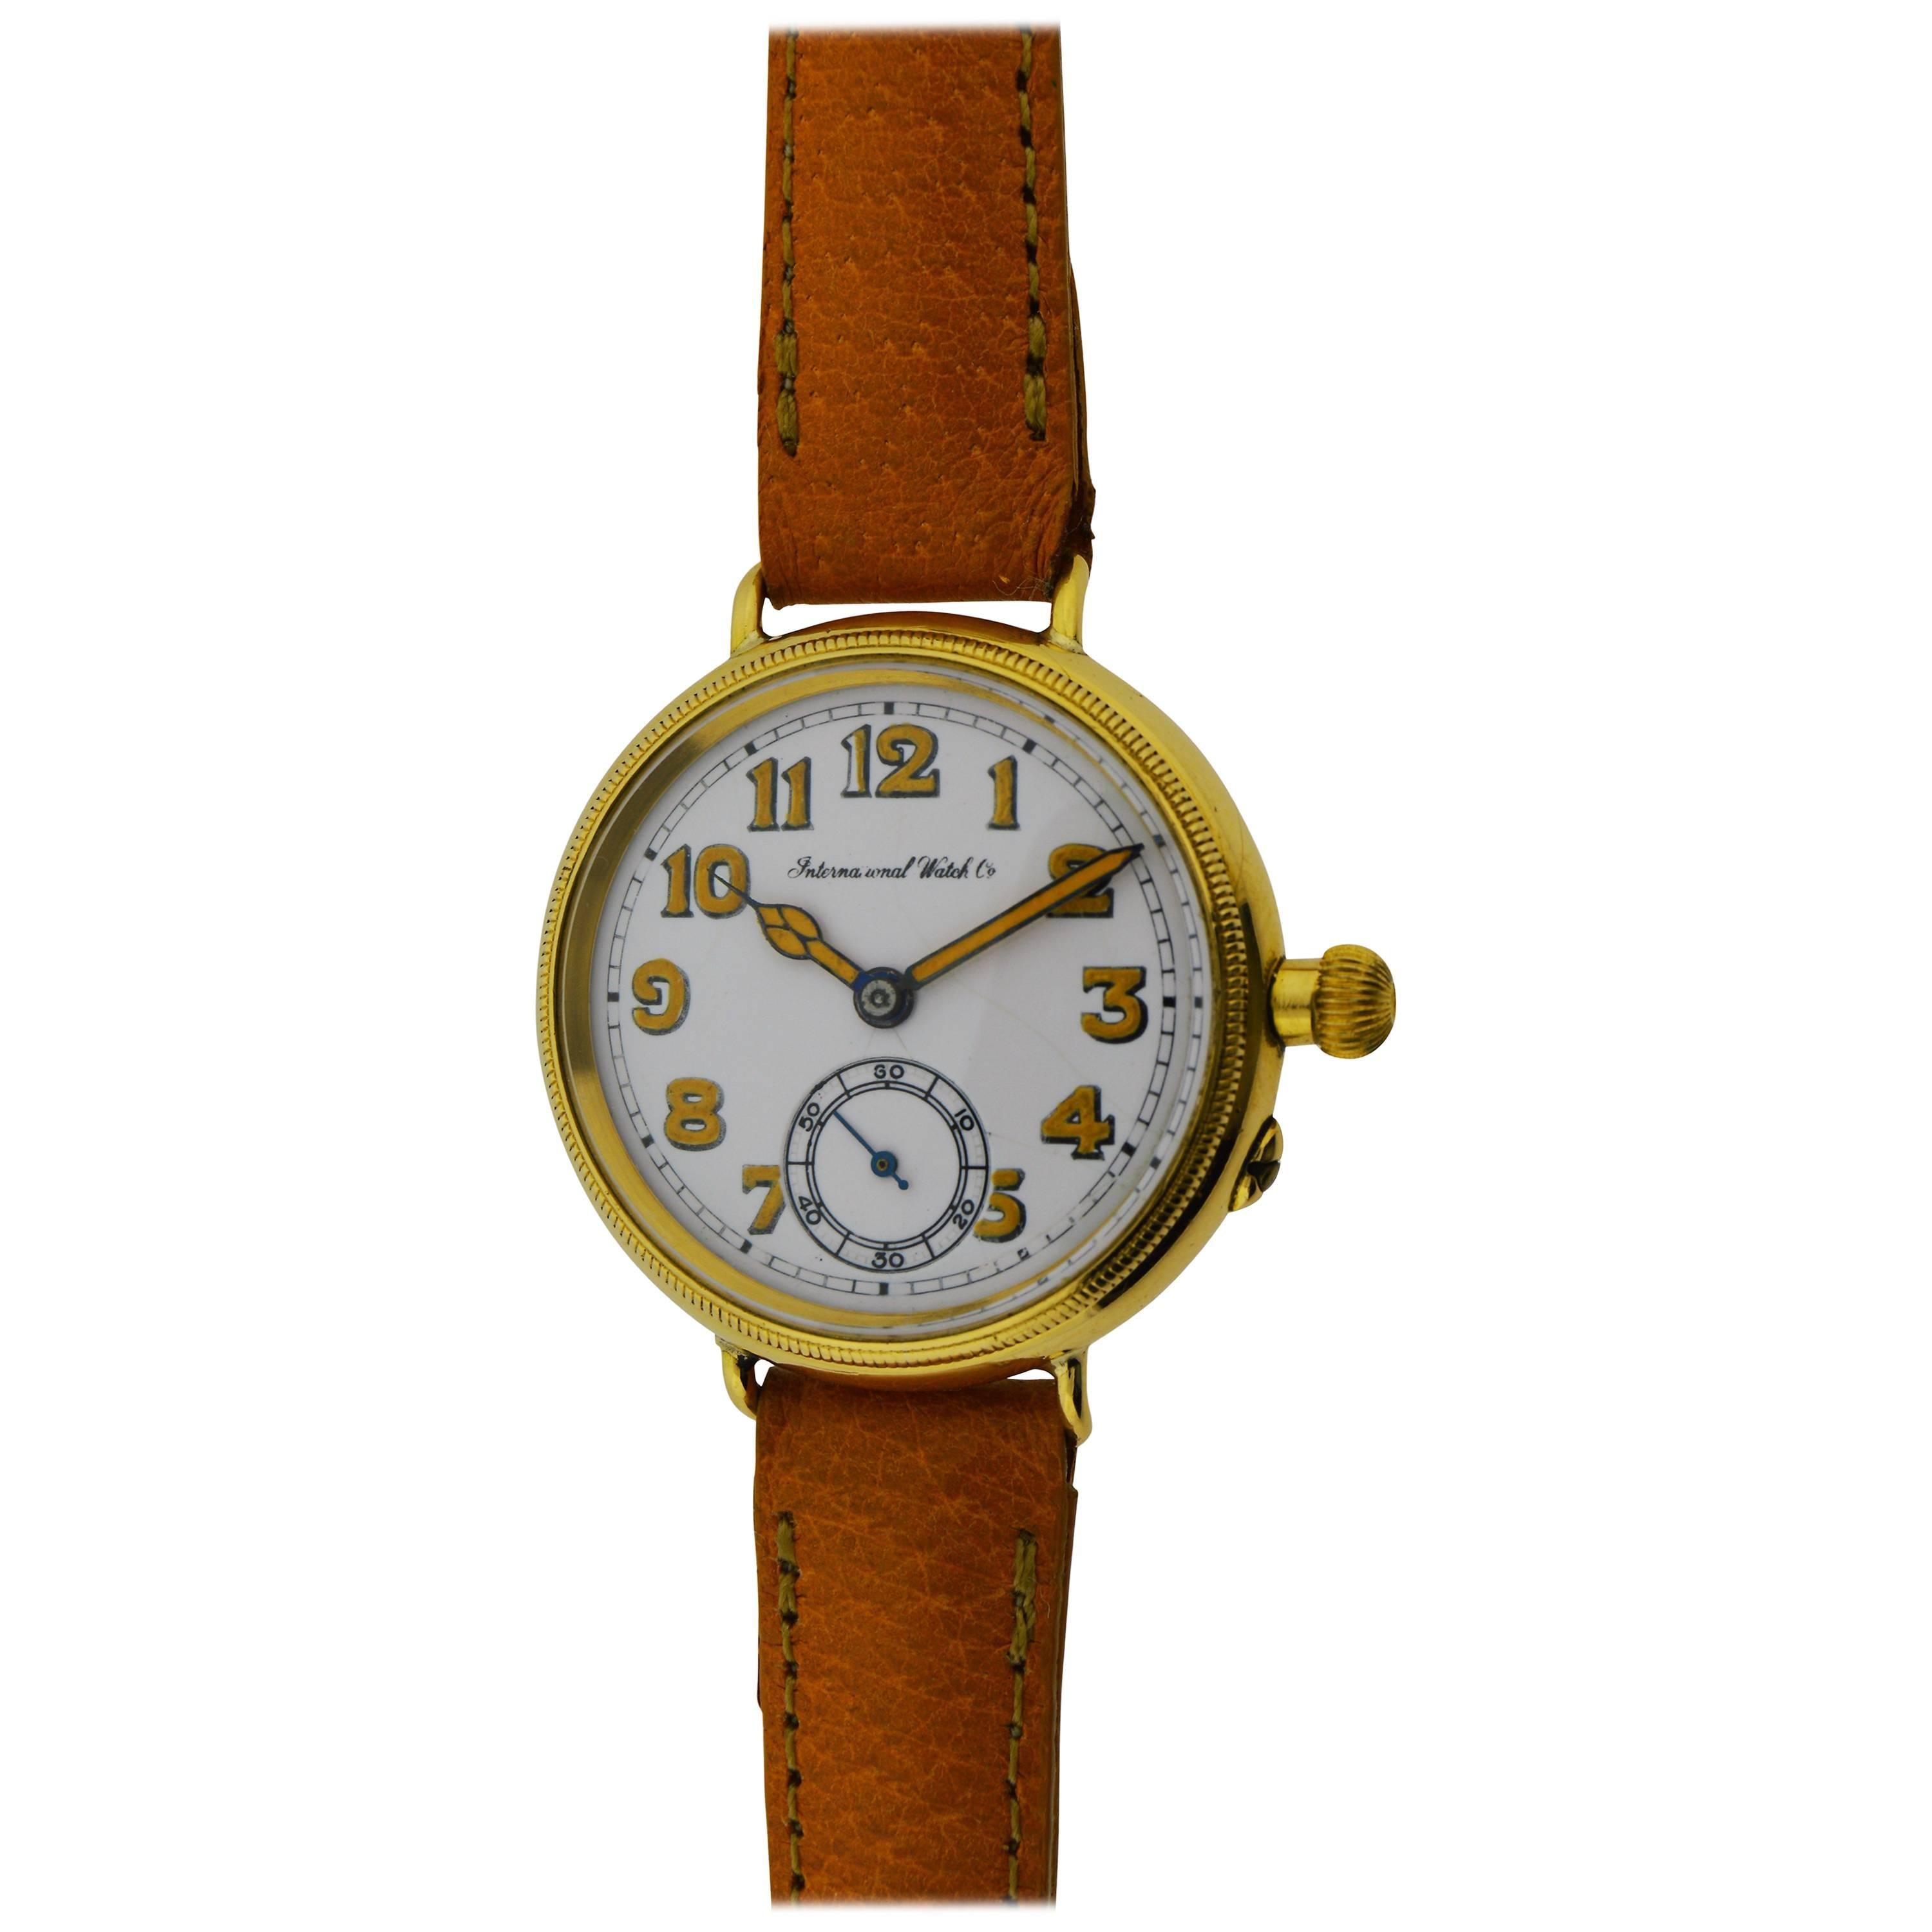 I.W.C. Schaffhausen Yellow Gold WWI Military Campaign Style Manual Watch